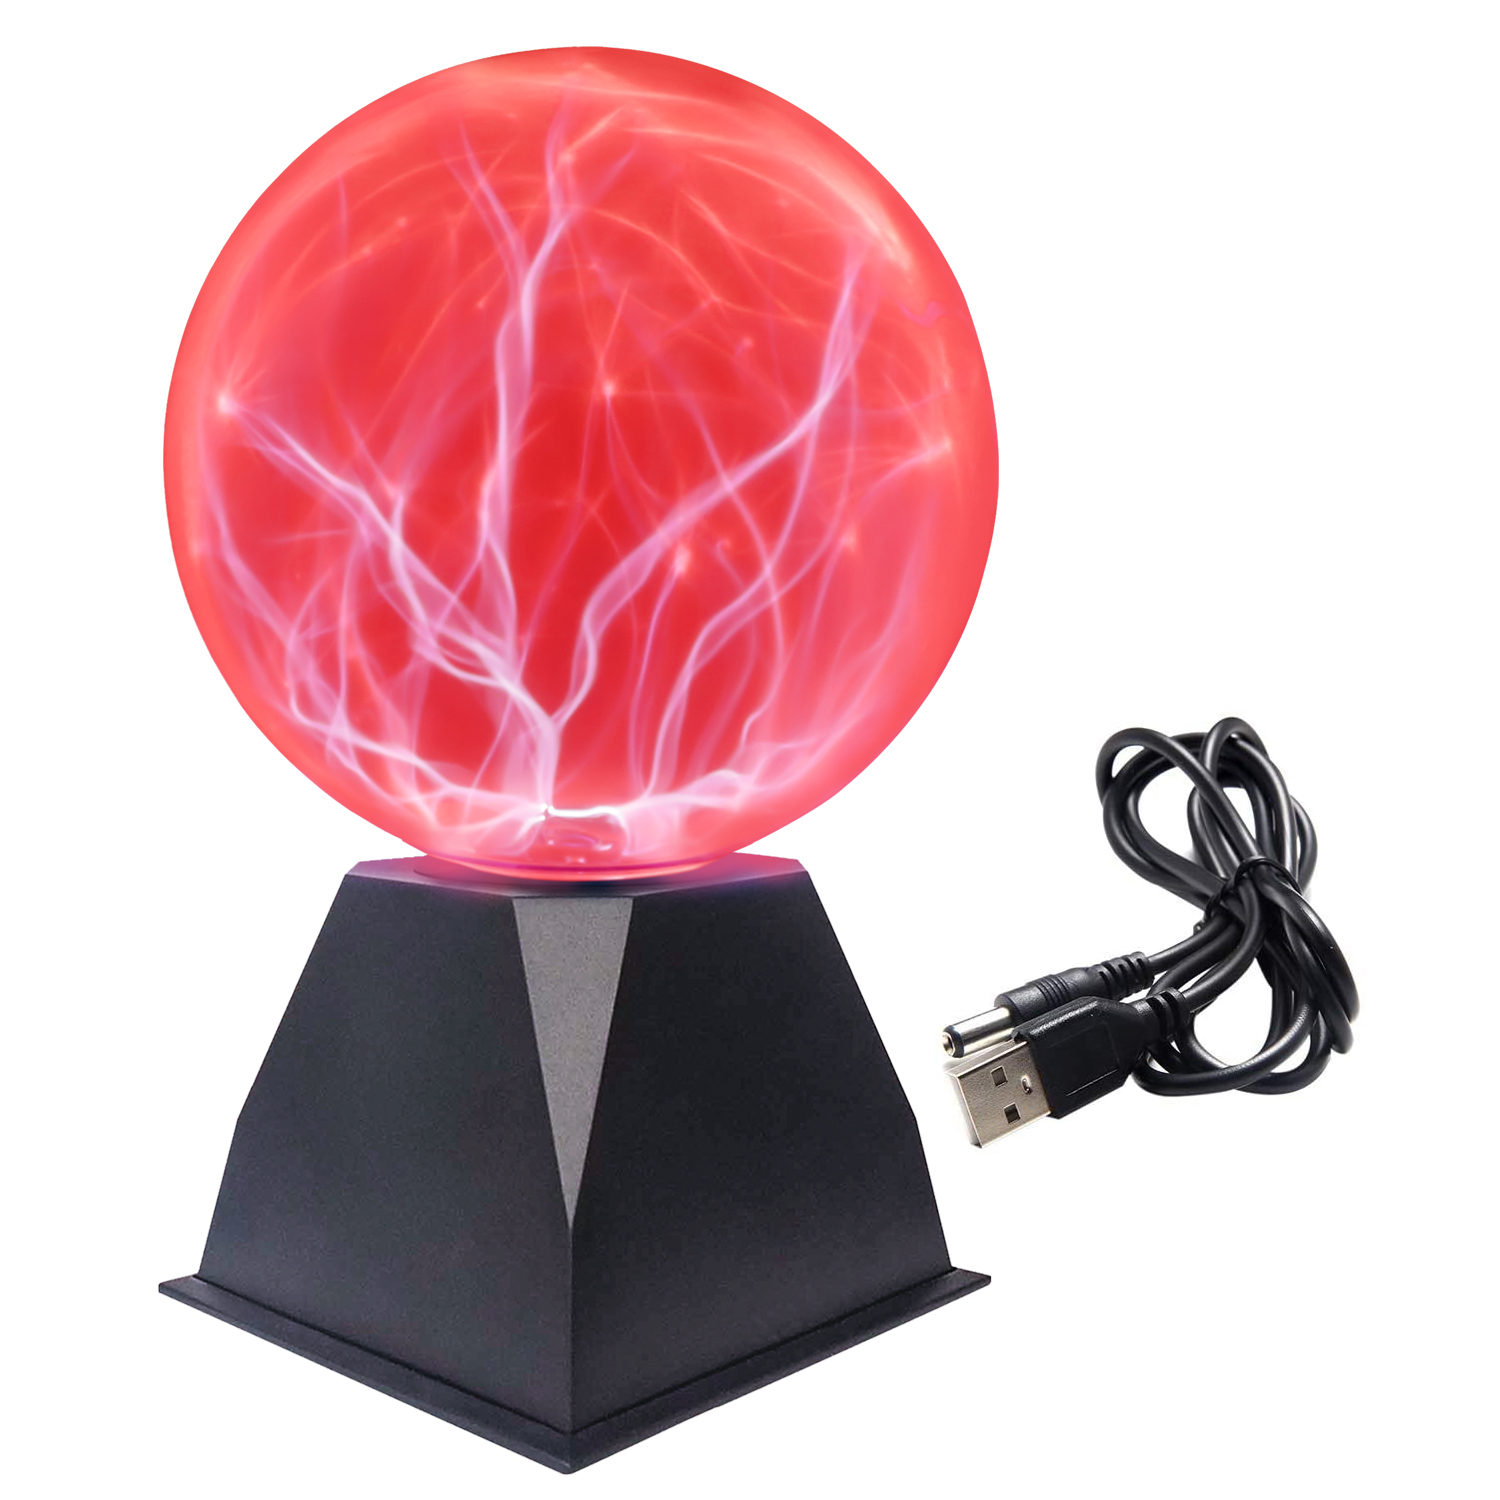 6 inch plasma ball with red light